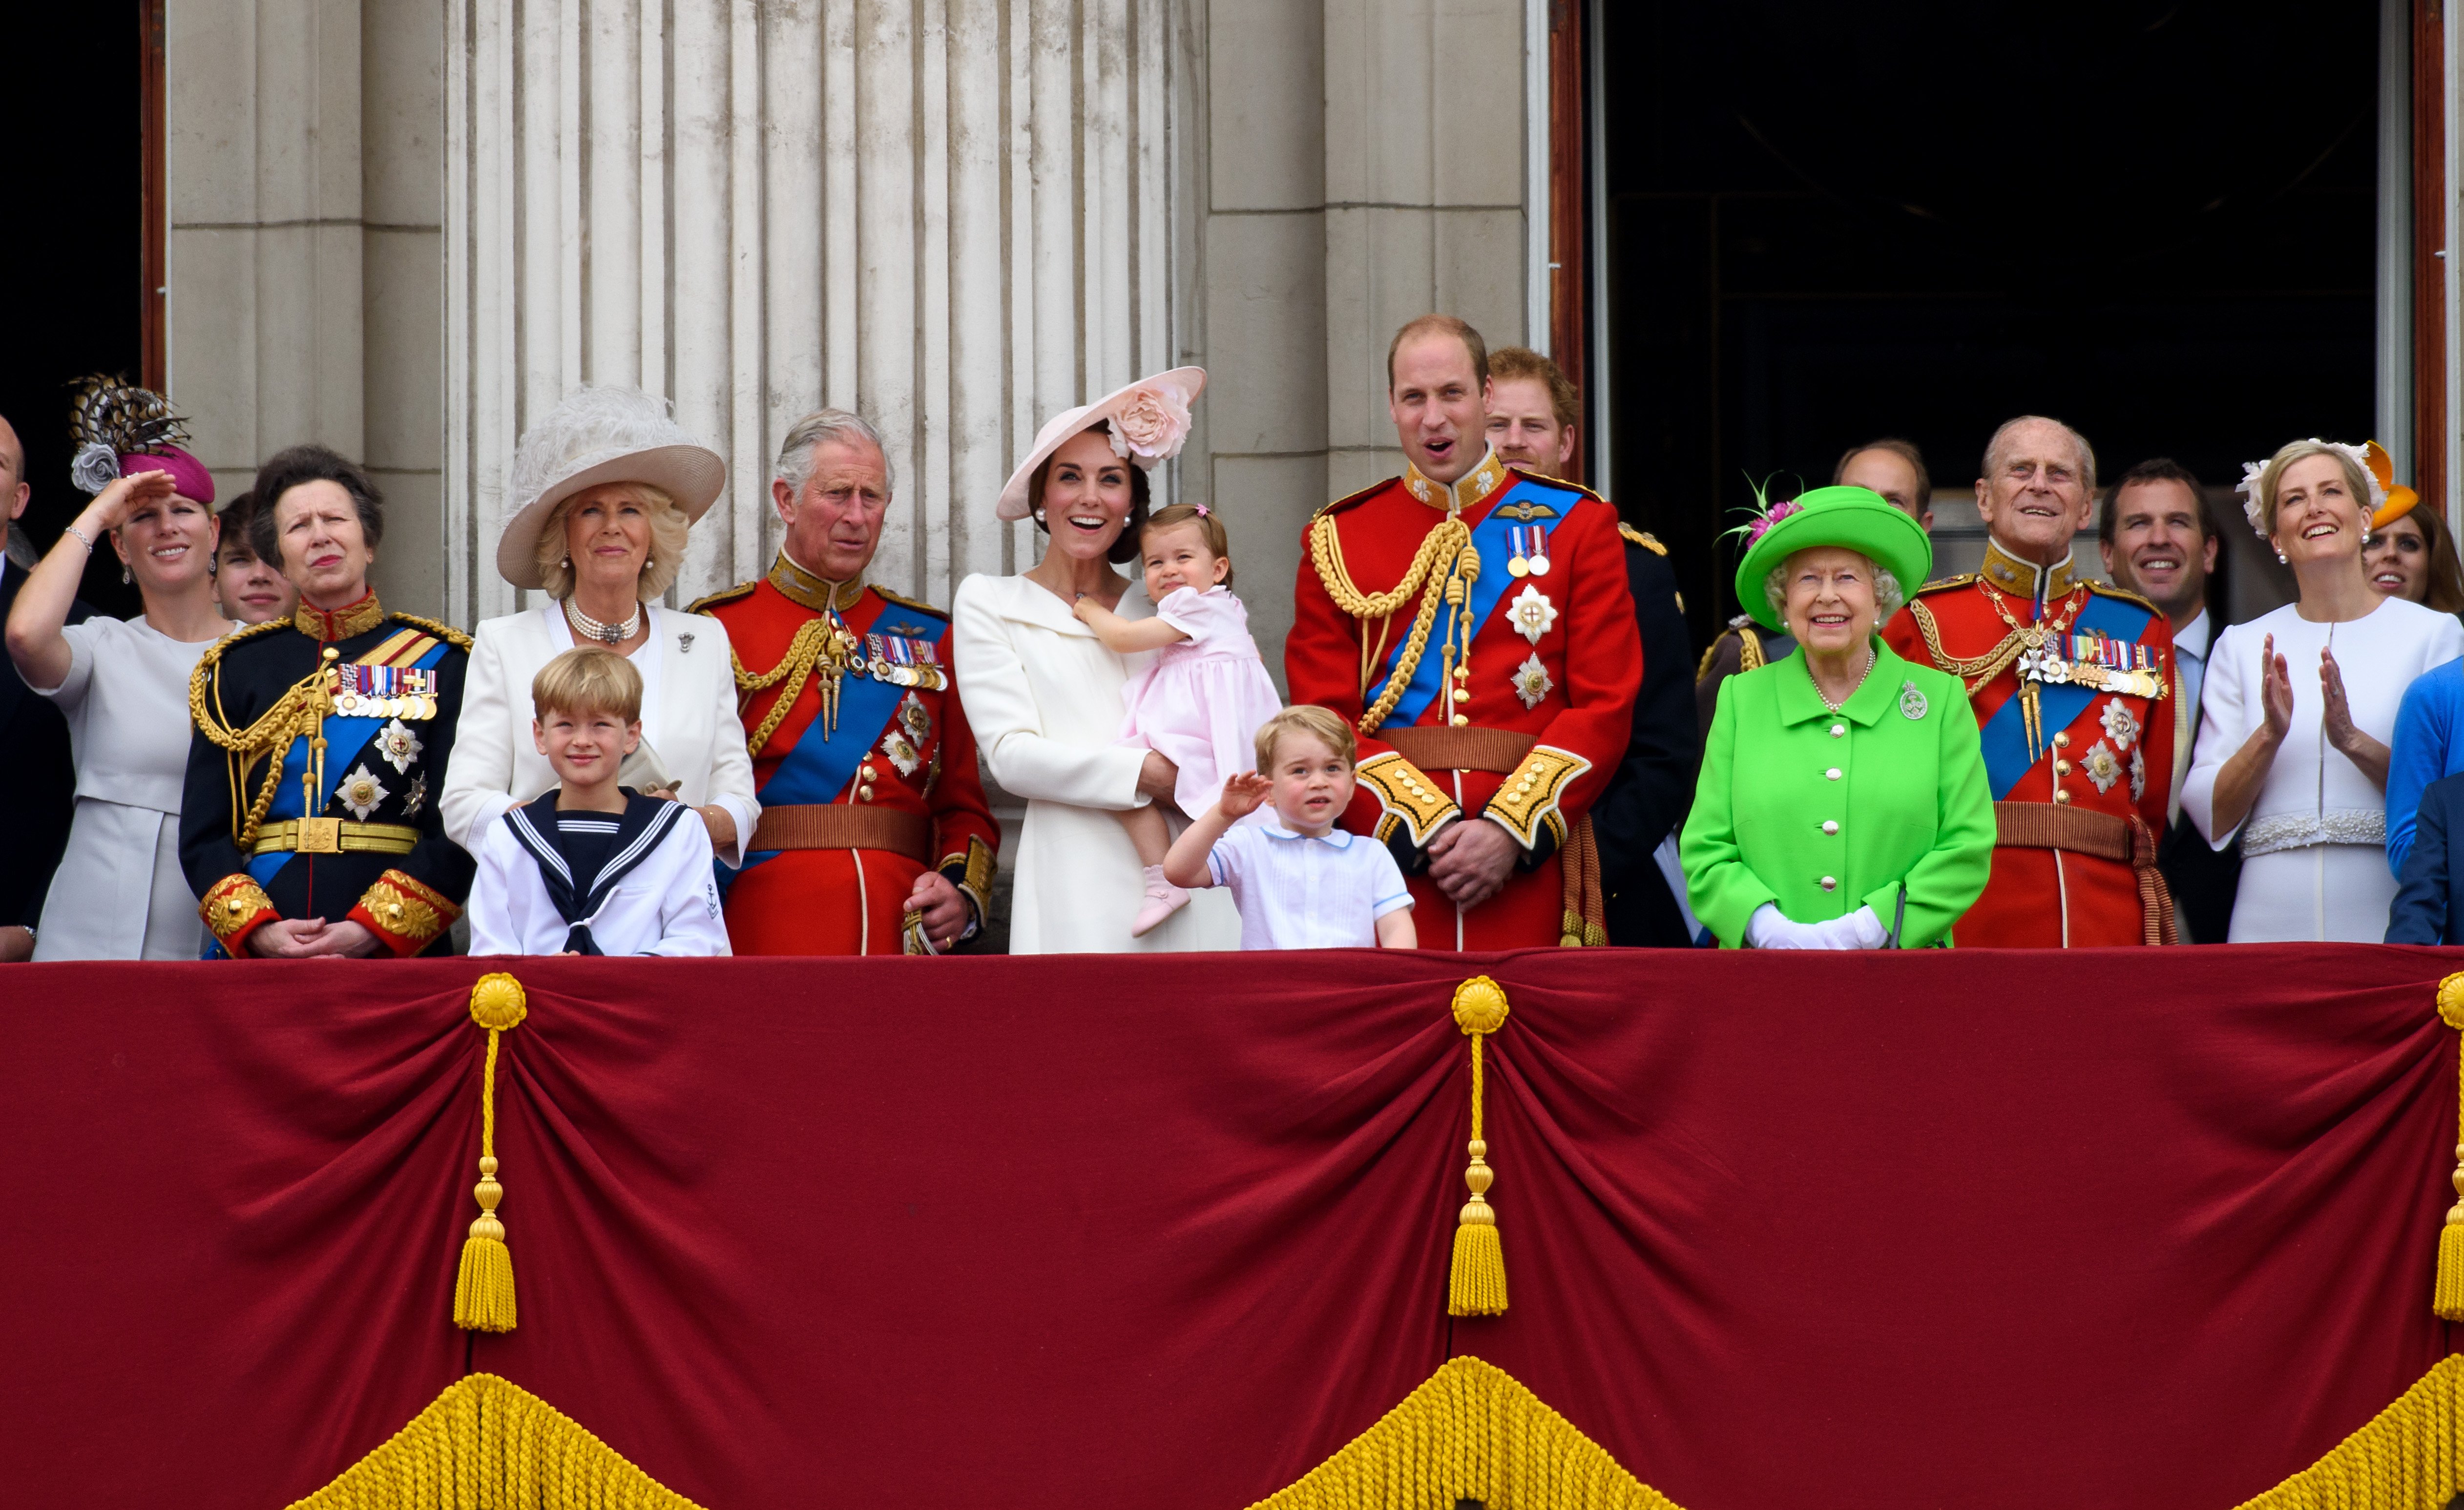 The Royal Family at Buckingham Palace during the Queen birthday parade in 2016. | Source: Getty Images